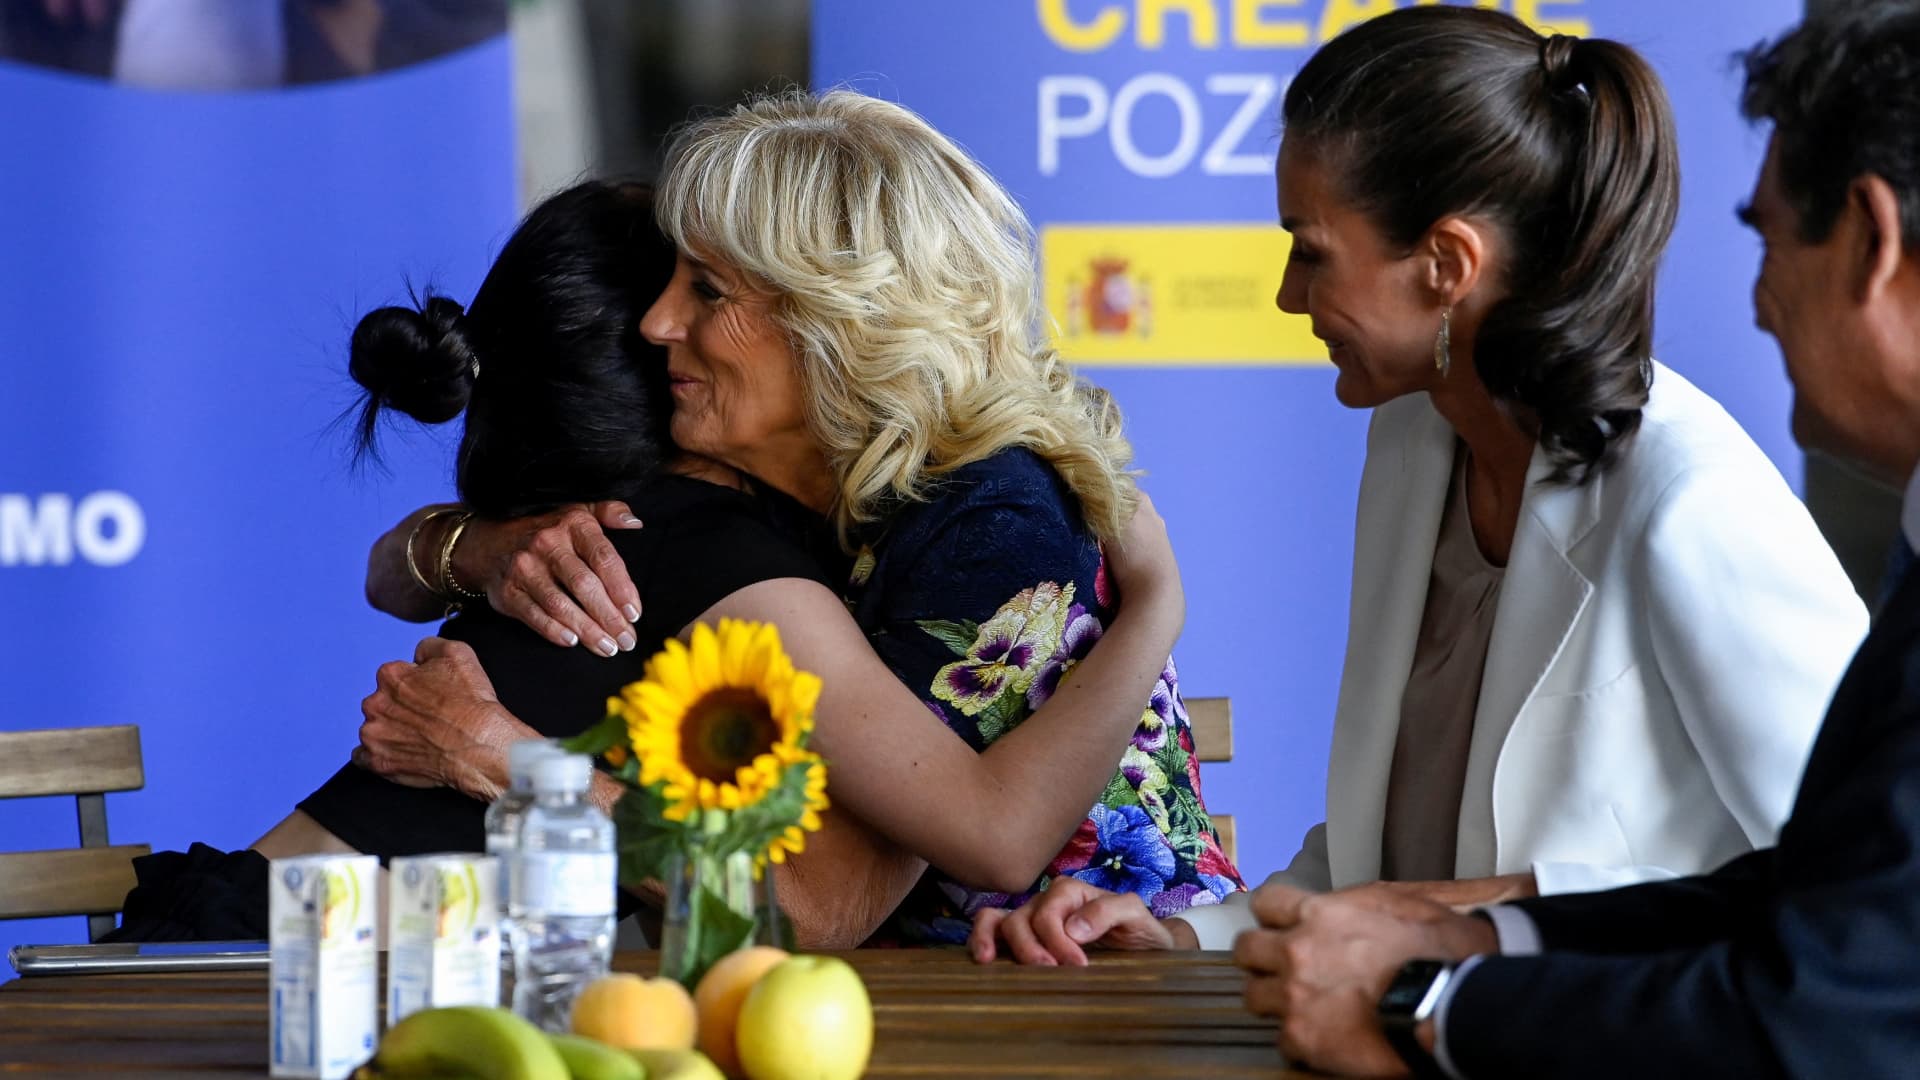 U.S. first lady Jill Biden embraces a girl next to Spain's Queen Letizia as they speak with members of a family from Ukraine during their visit to a reception centre for Ukrainian refugees in Pozuelo de Alarcon, on the sidelines of NATO summit, near Madrid, Spain, June 28, 2022.